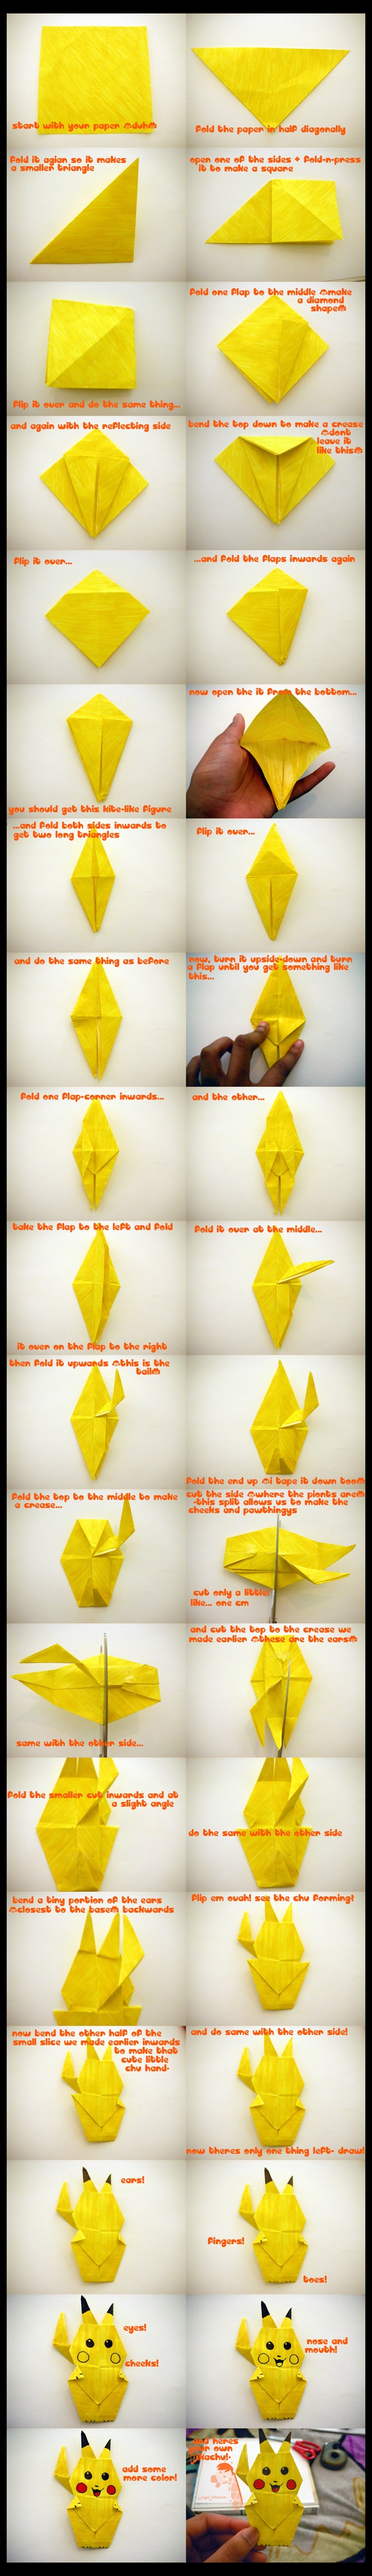 How To: Make An Origami Pikachu